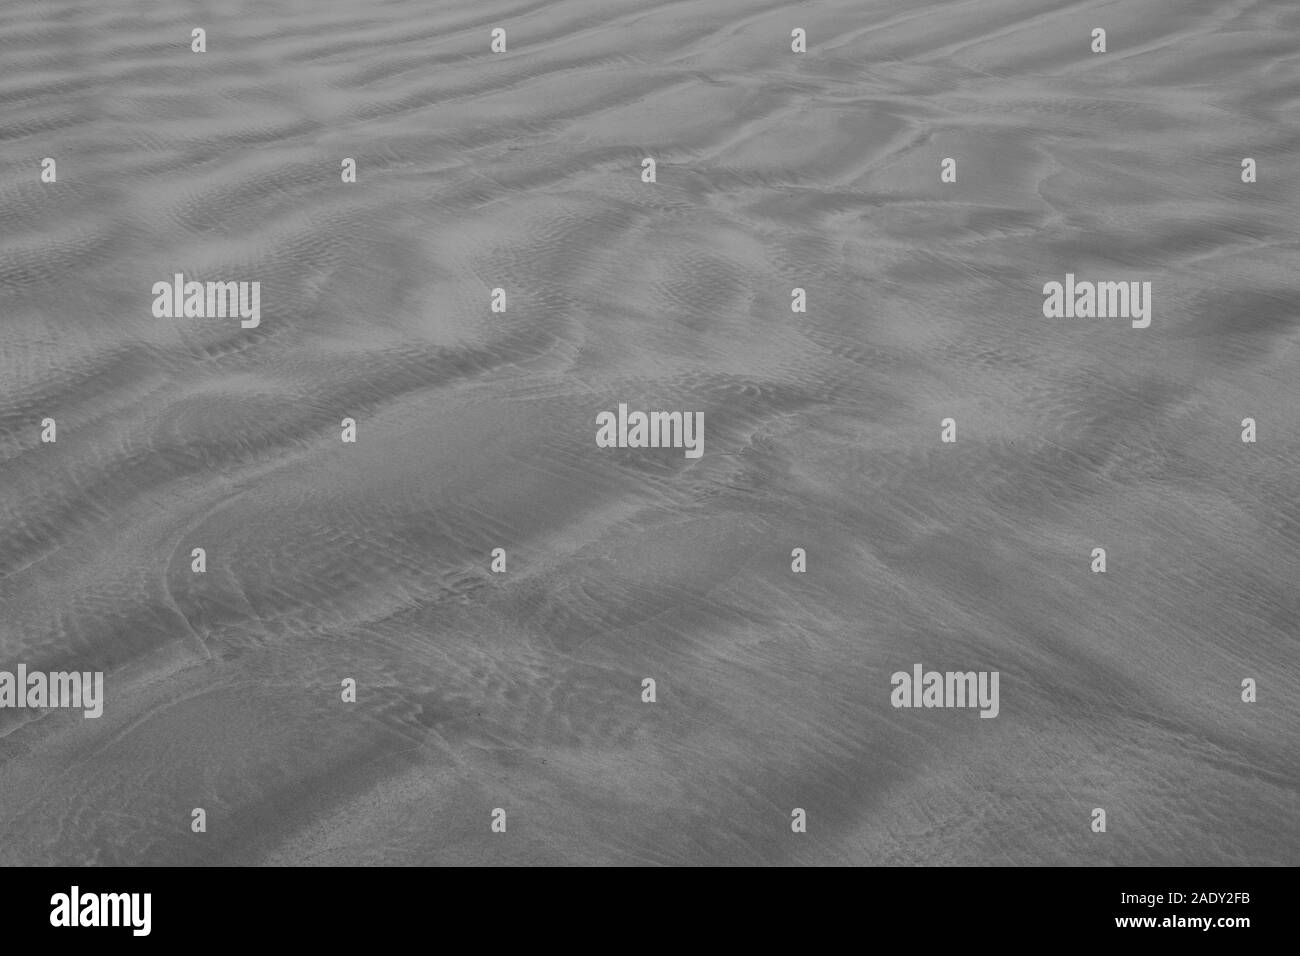 Beach sand texture shot in Grey-scale Stock Photo